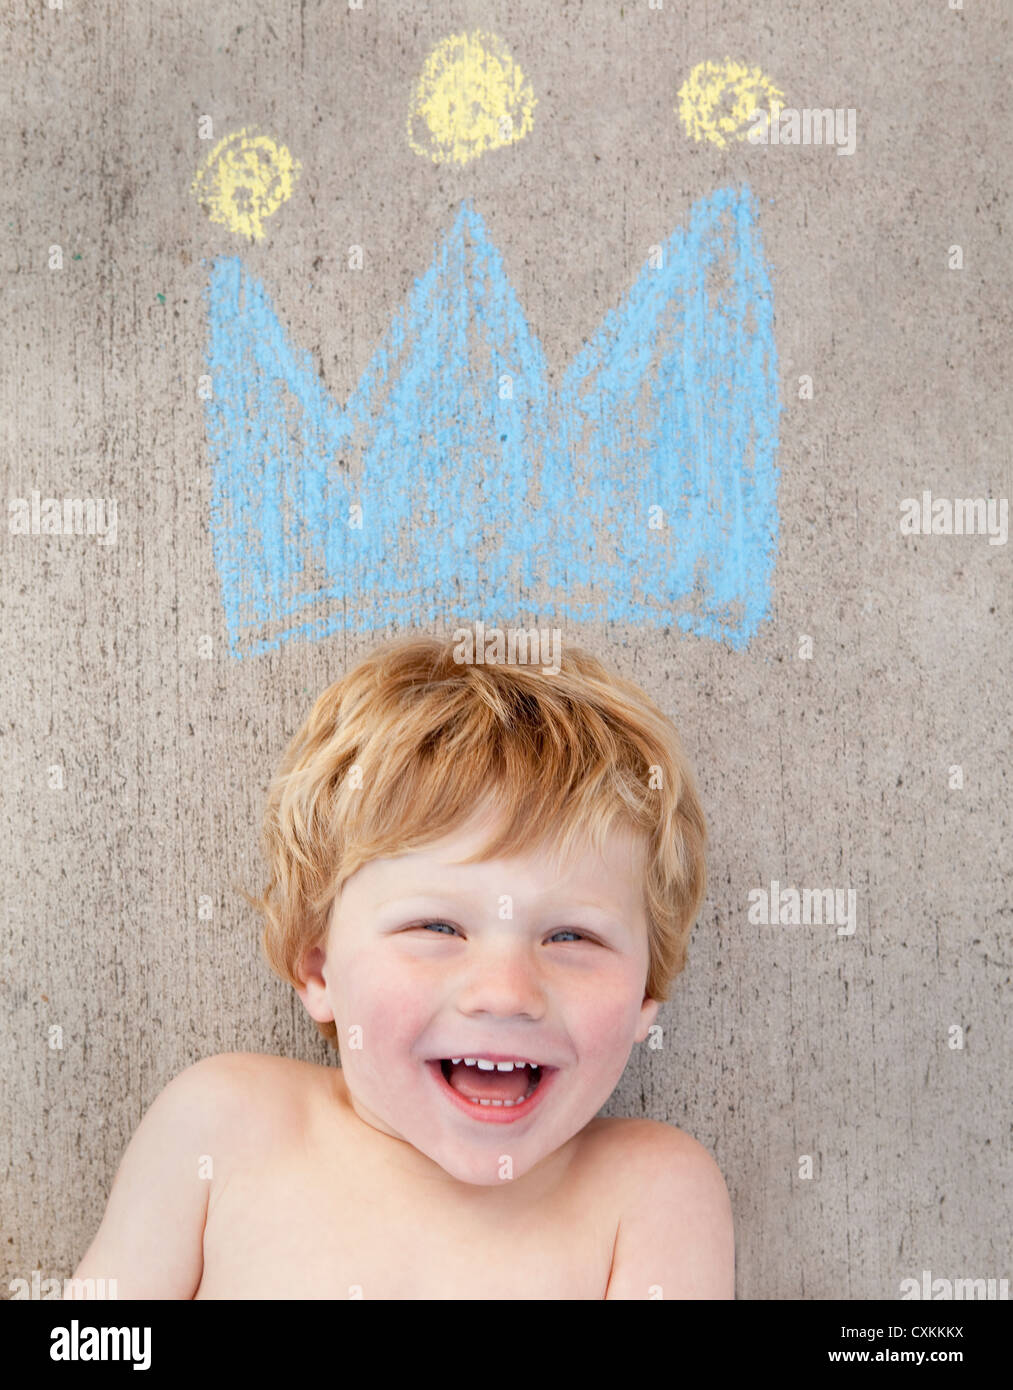 Young boy with chalk drawn crown Stock Photo